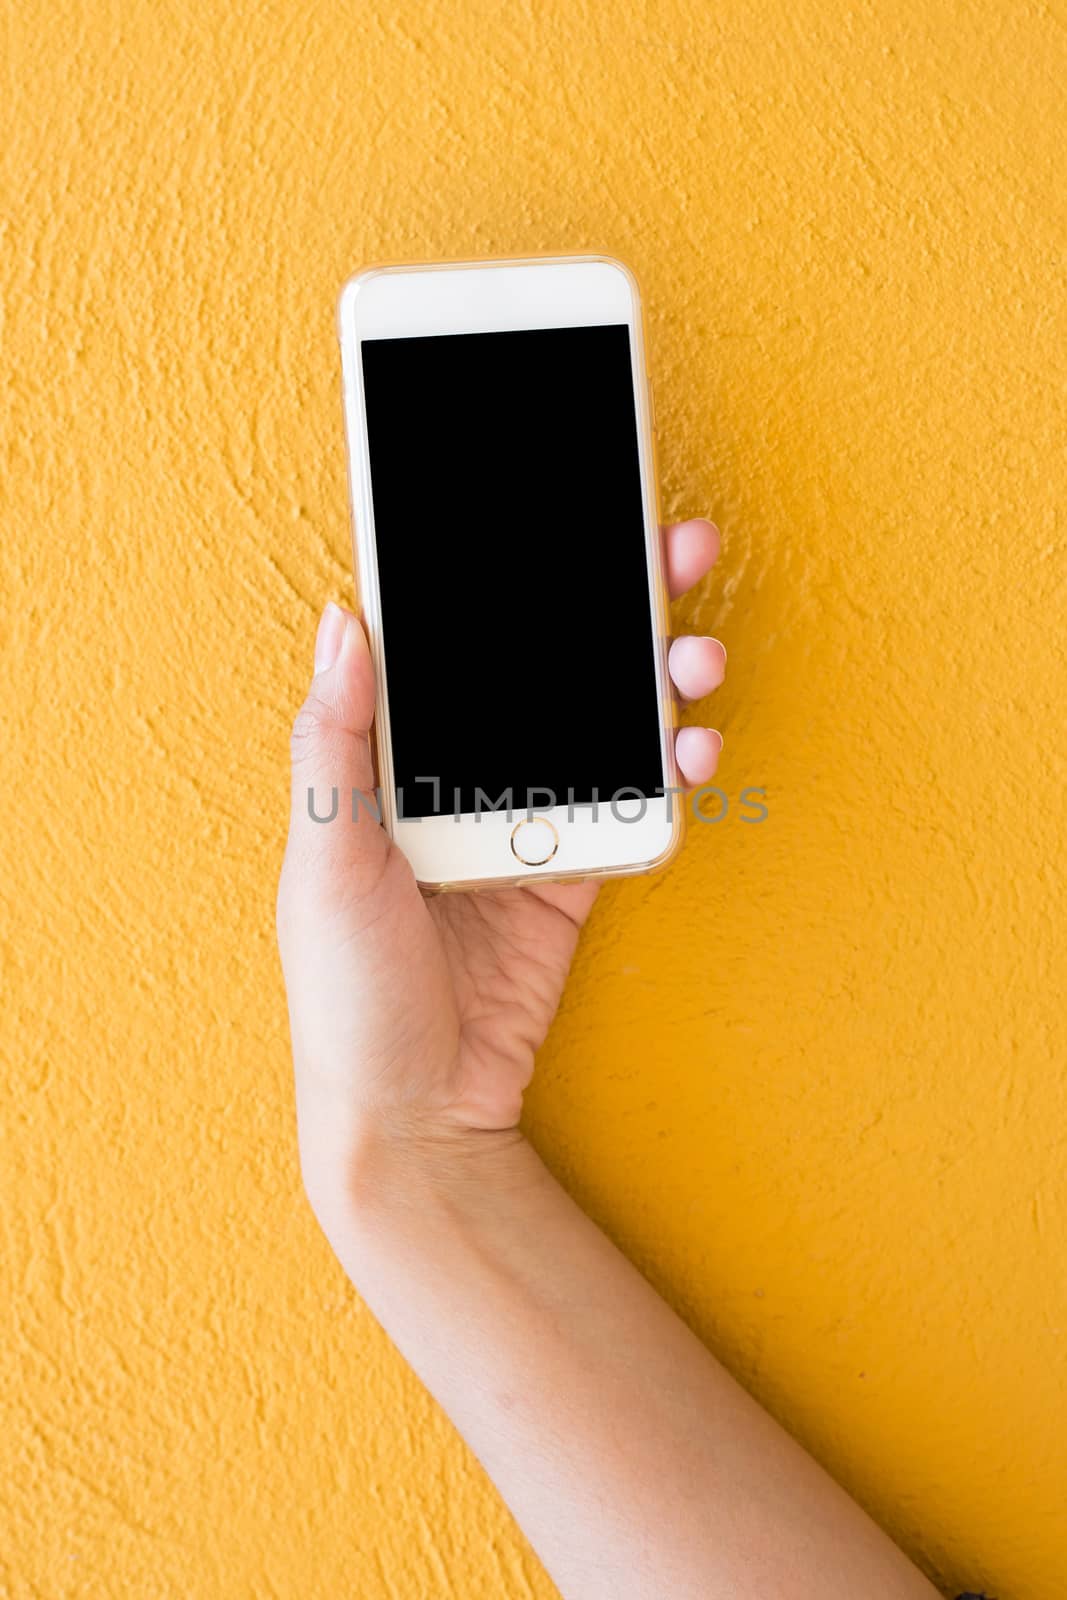 Hand holding white Smartphone on yellow wall background